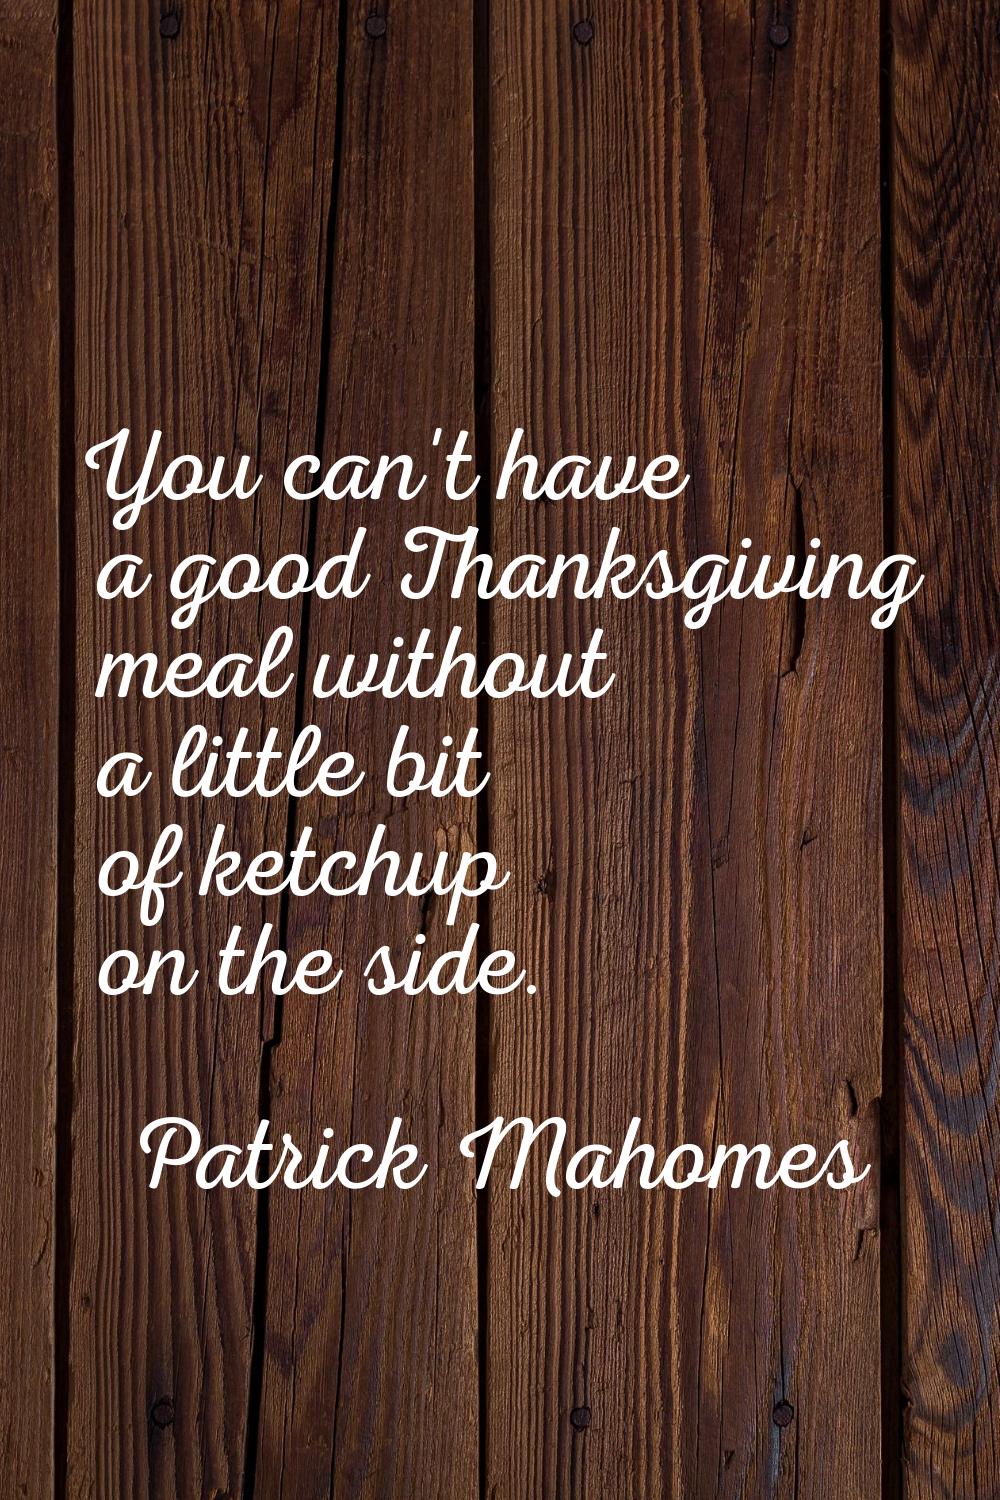 You can't have a good Thanksgiving meal without a little bit of ketchup on the side.